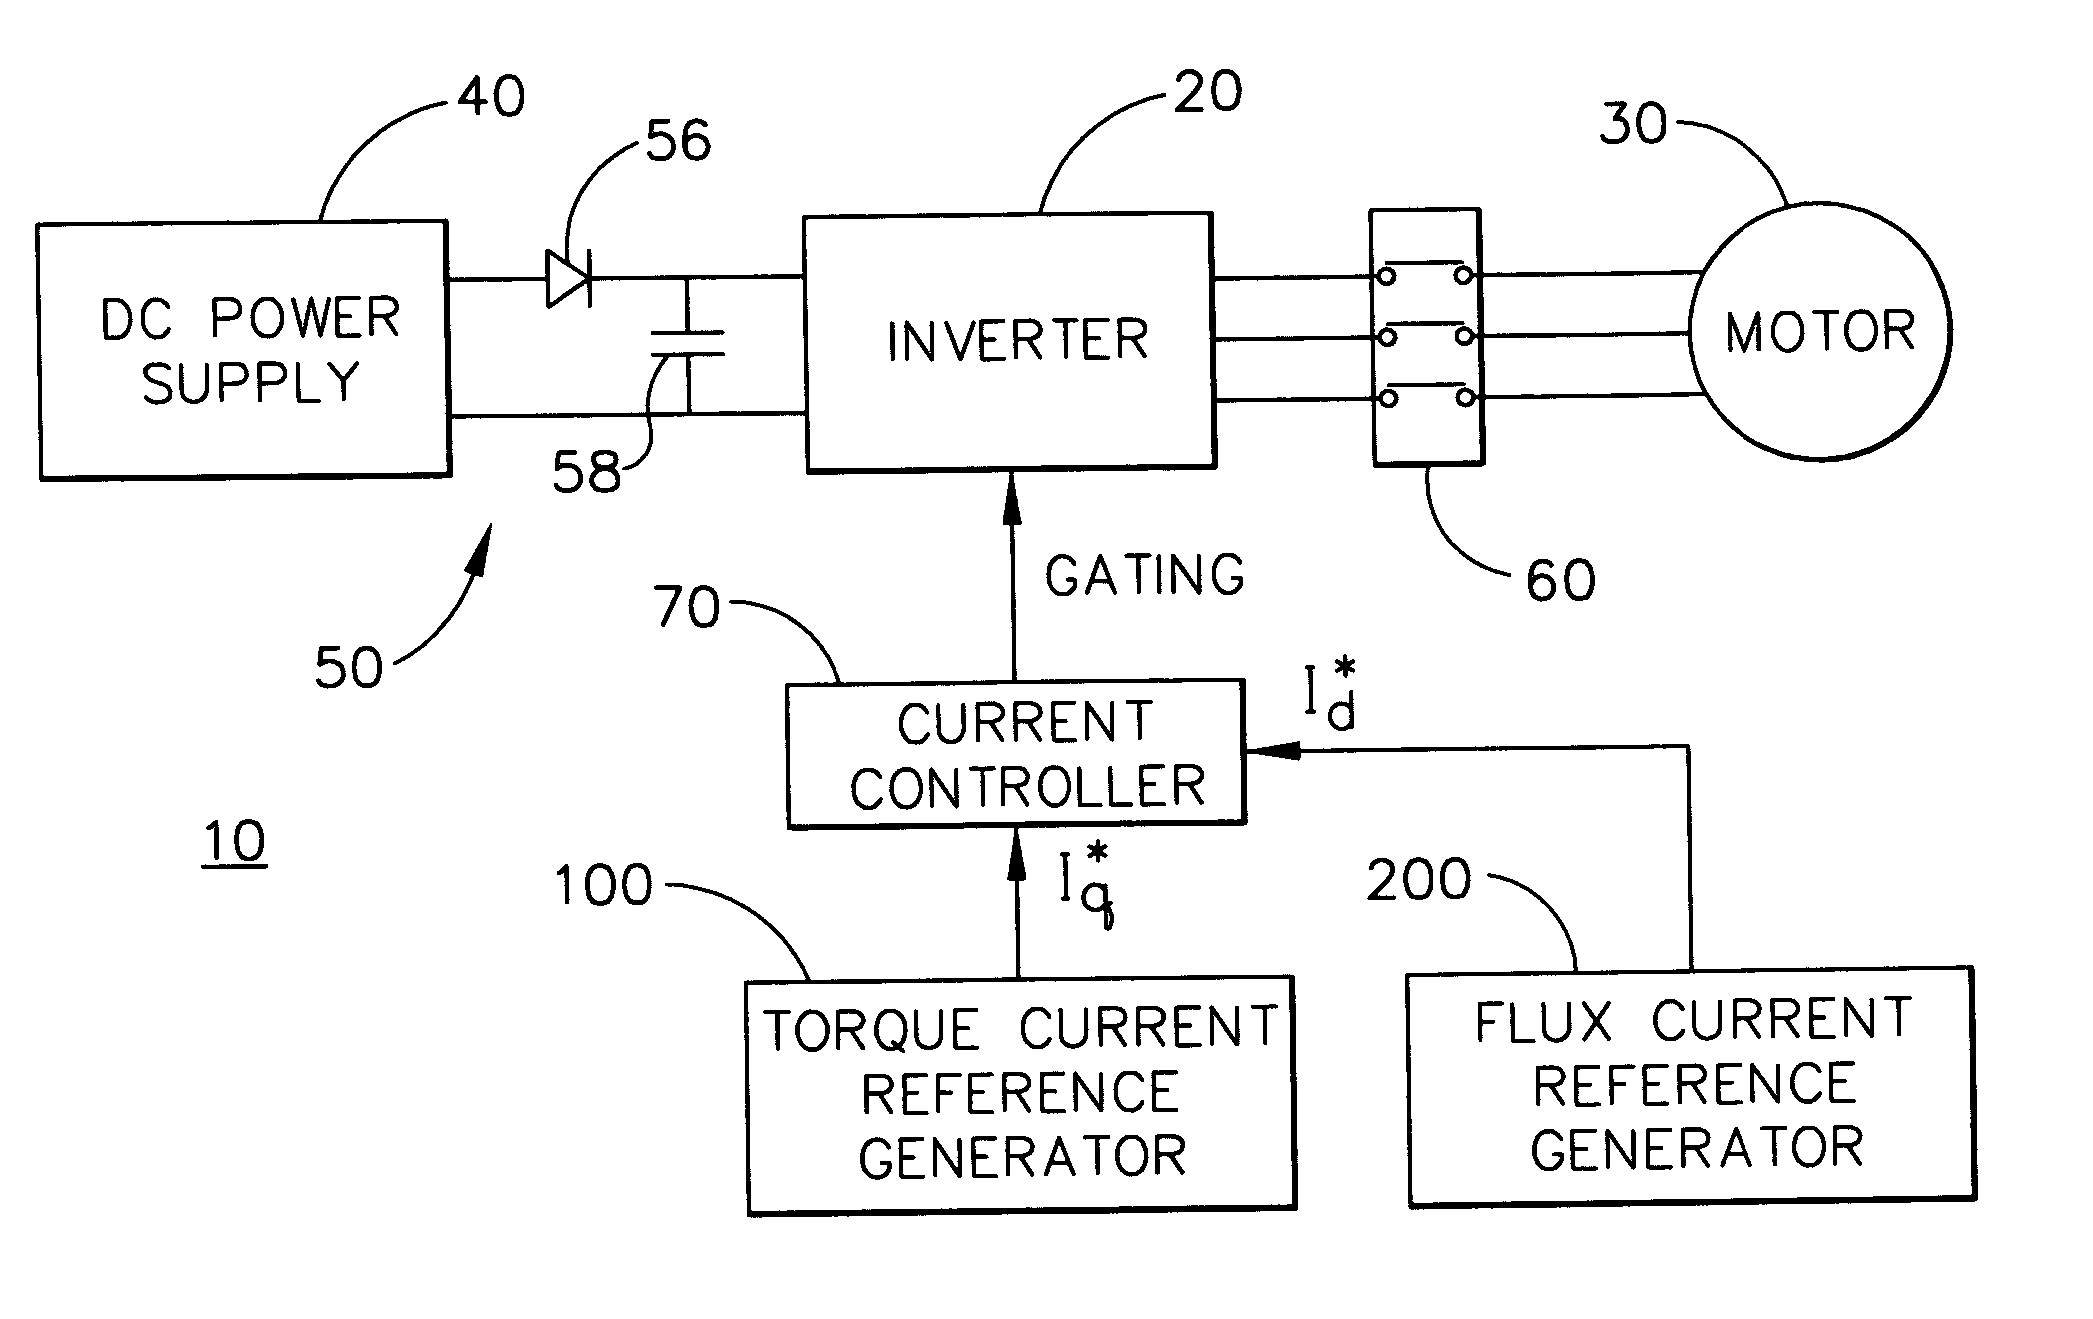 Power converter controlling apparatus and method providing ride through capability during power interruption in a motor drive system